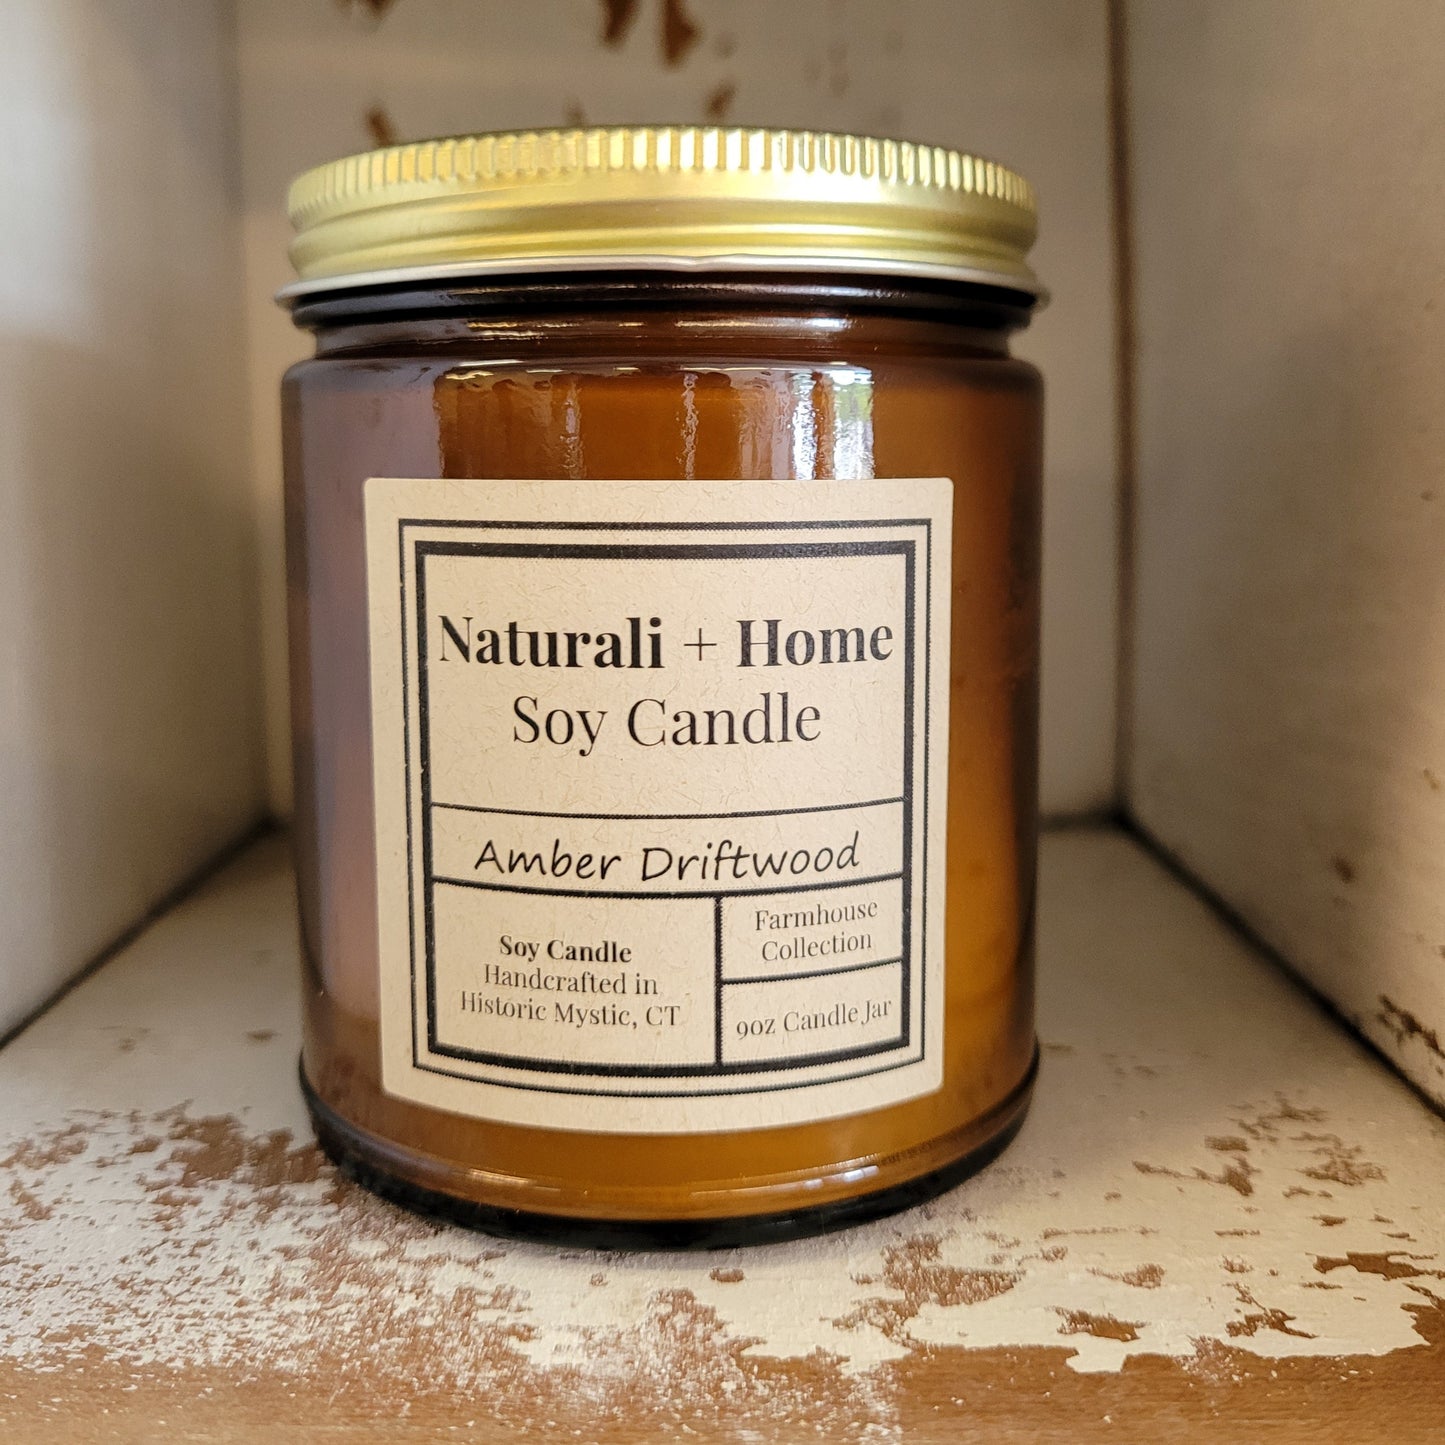 Amber Driftwood Soy Candle - Naturali Home